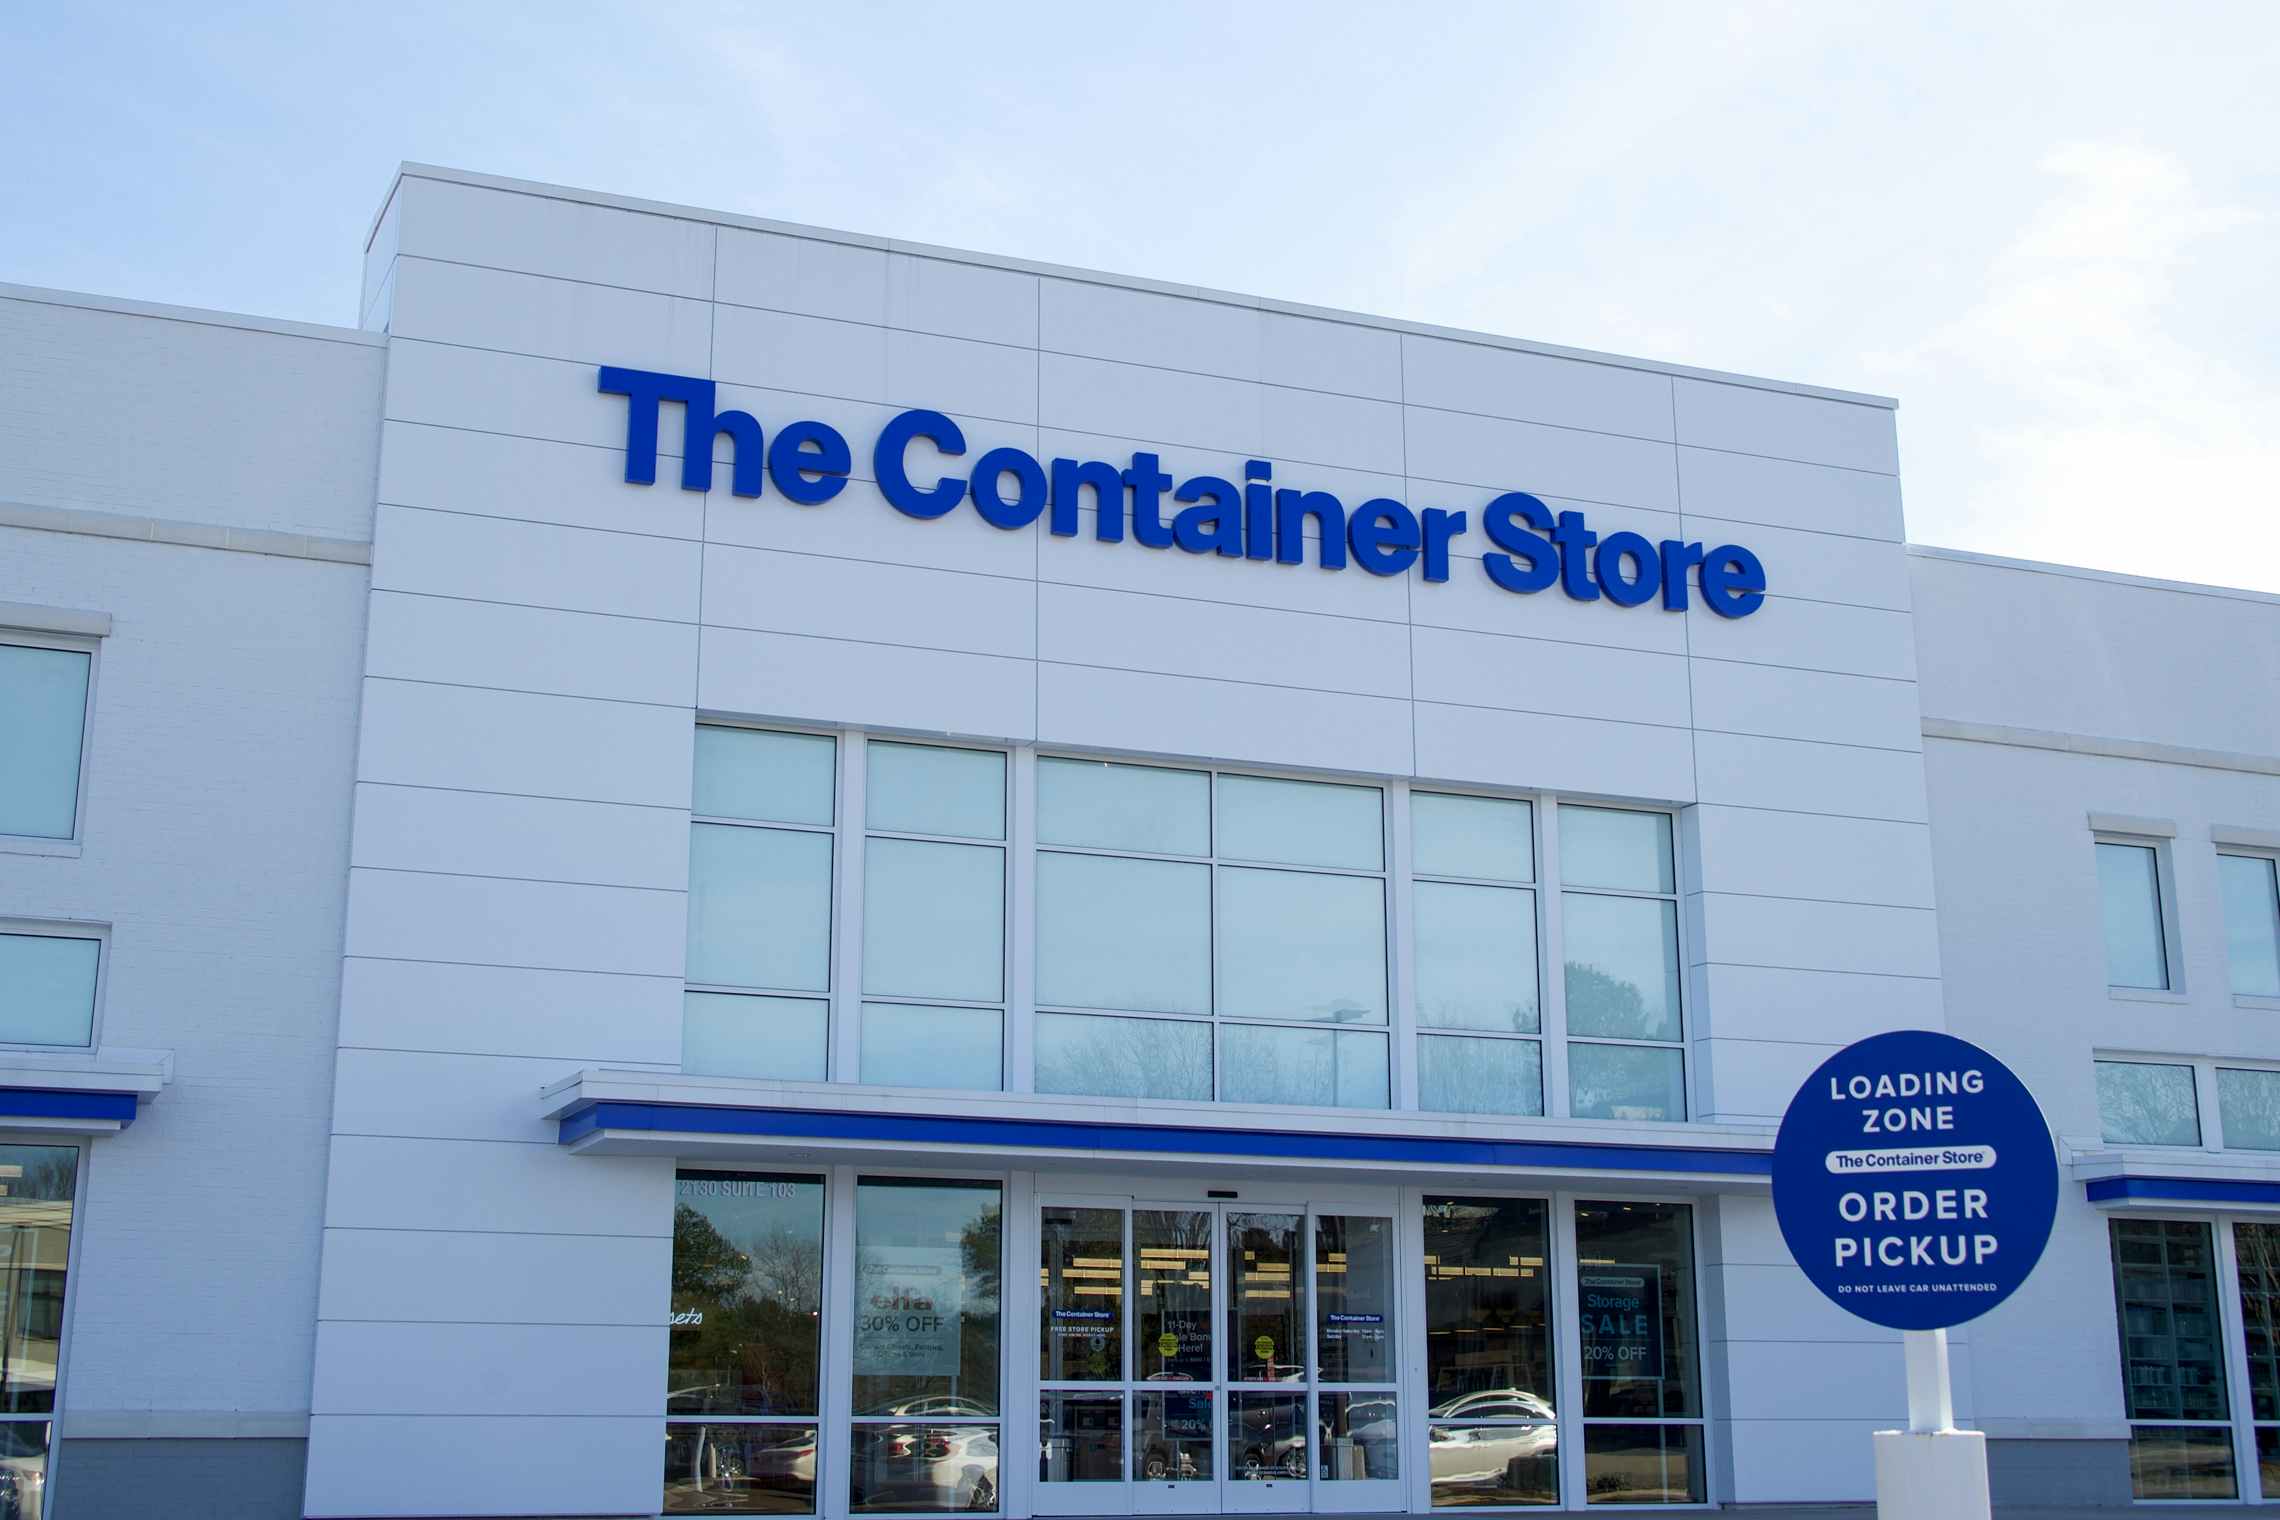 The container store order pickup